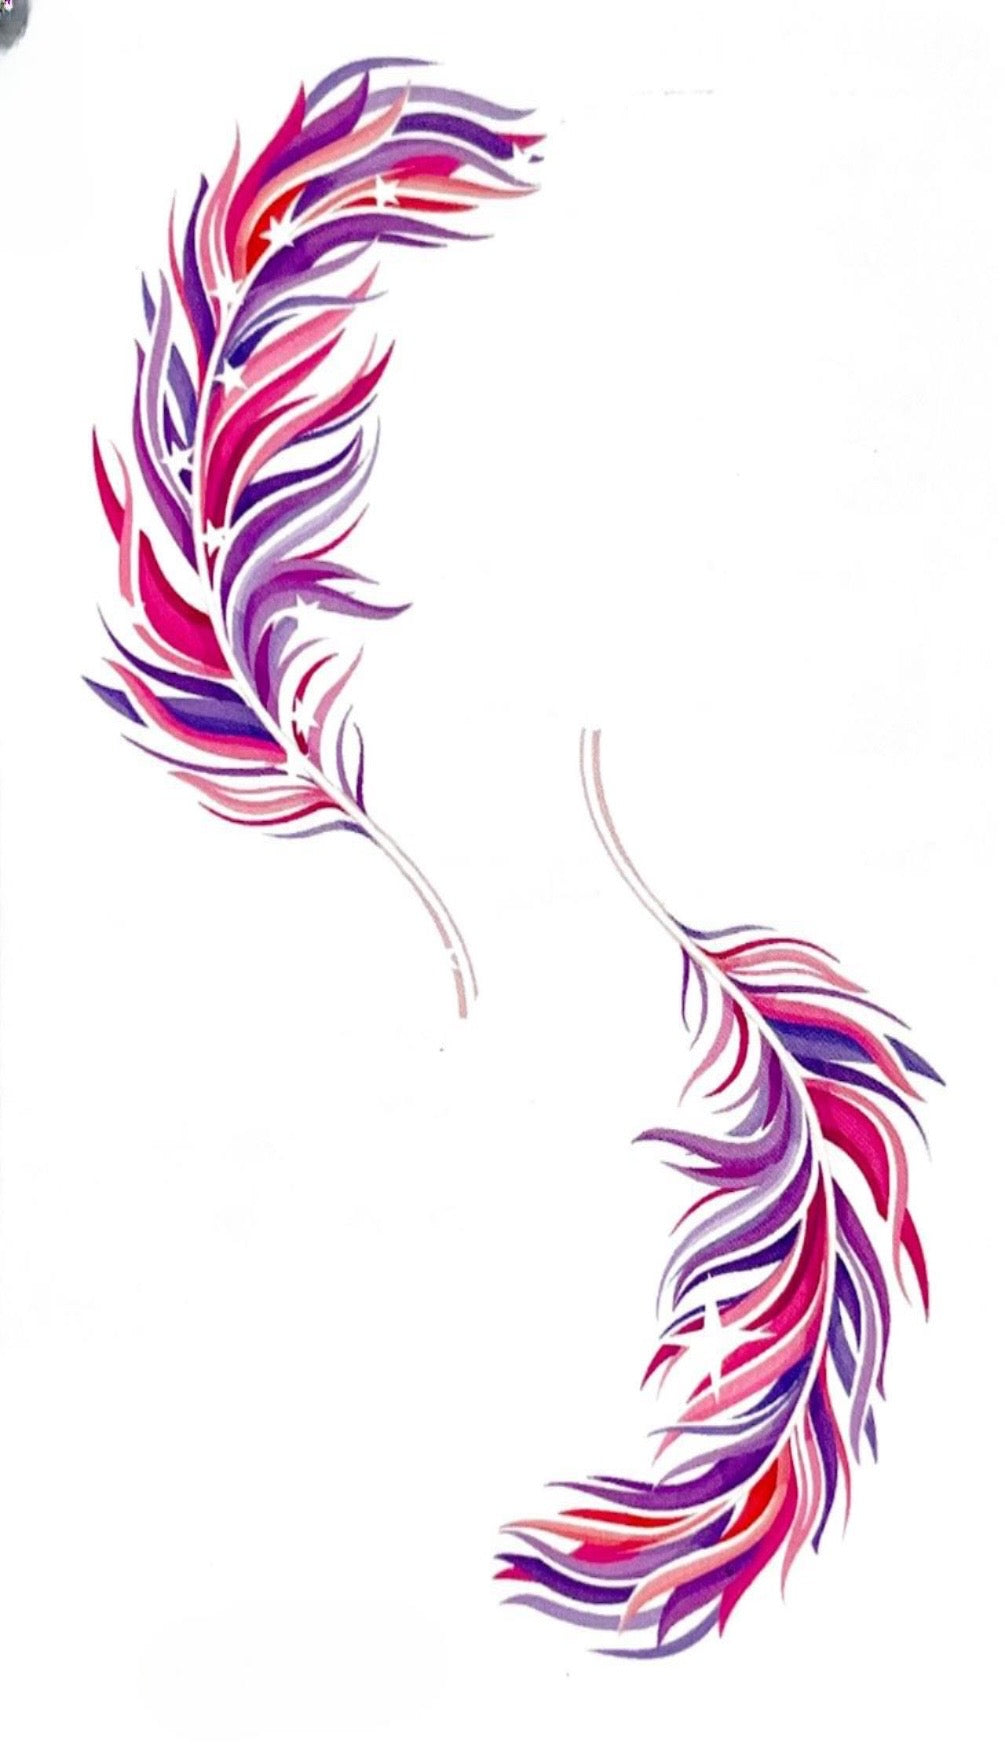 Temporary Body Tattoo - Feathers 02 ( Glow in the dark )